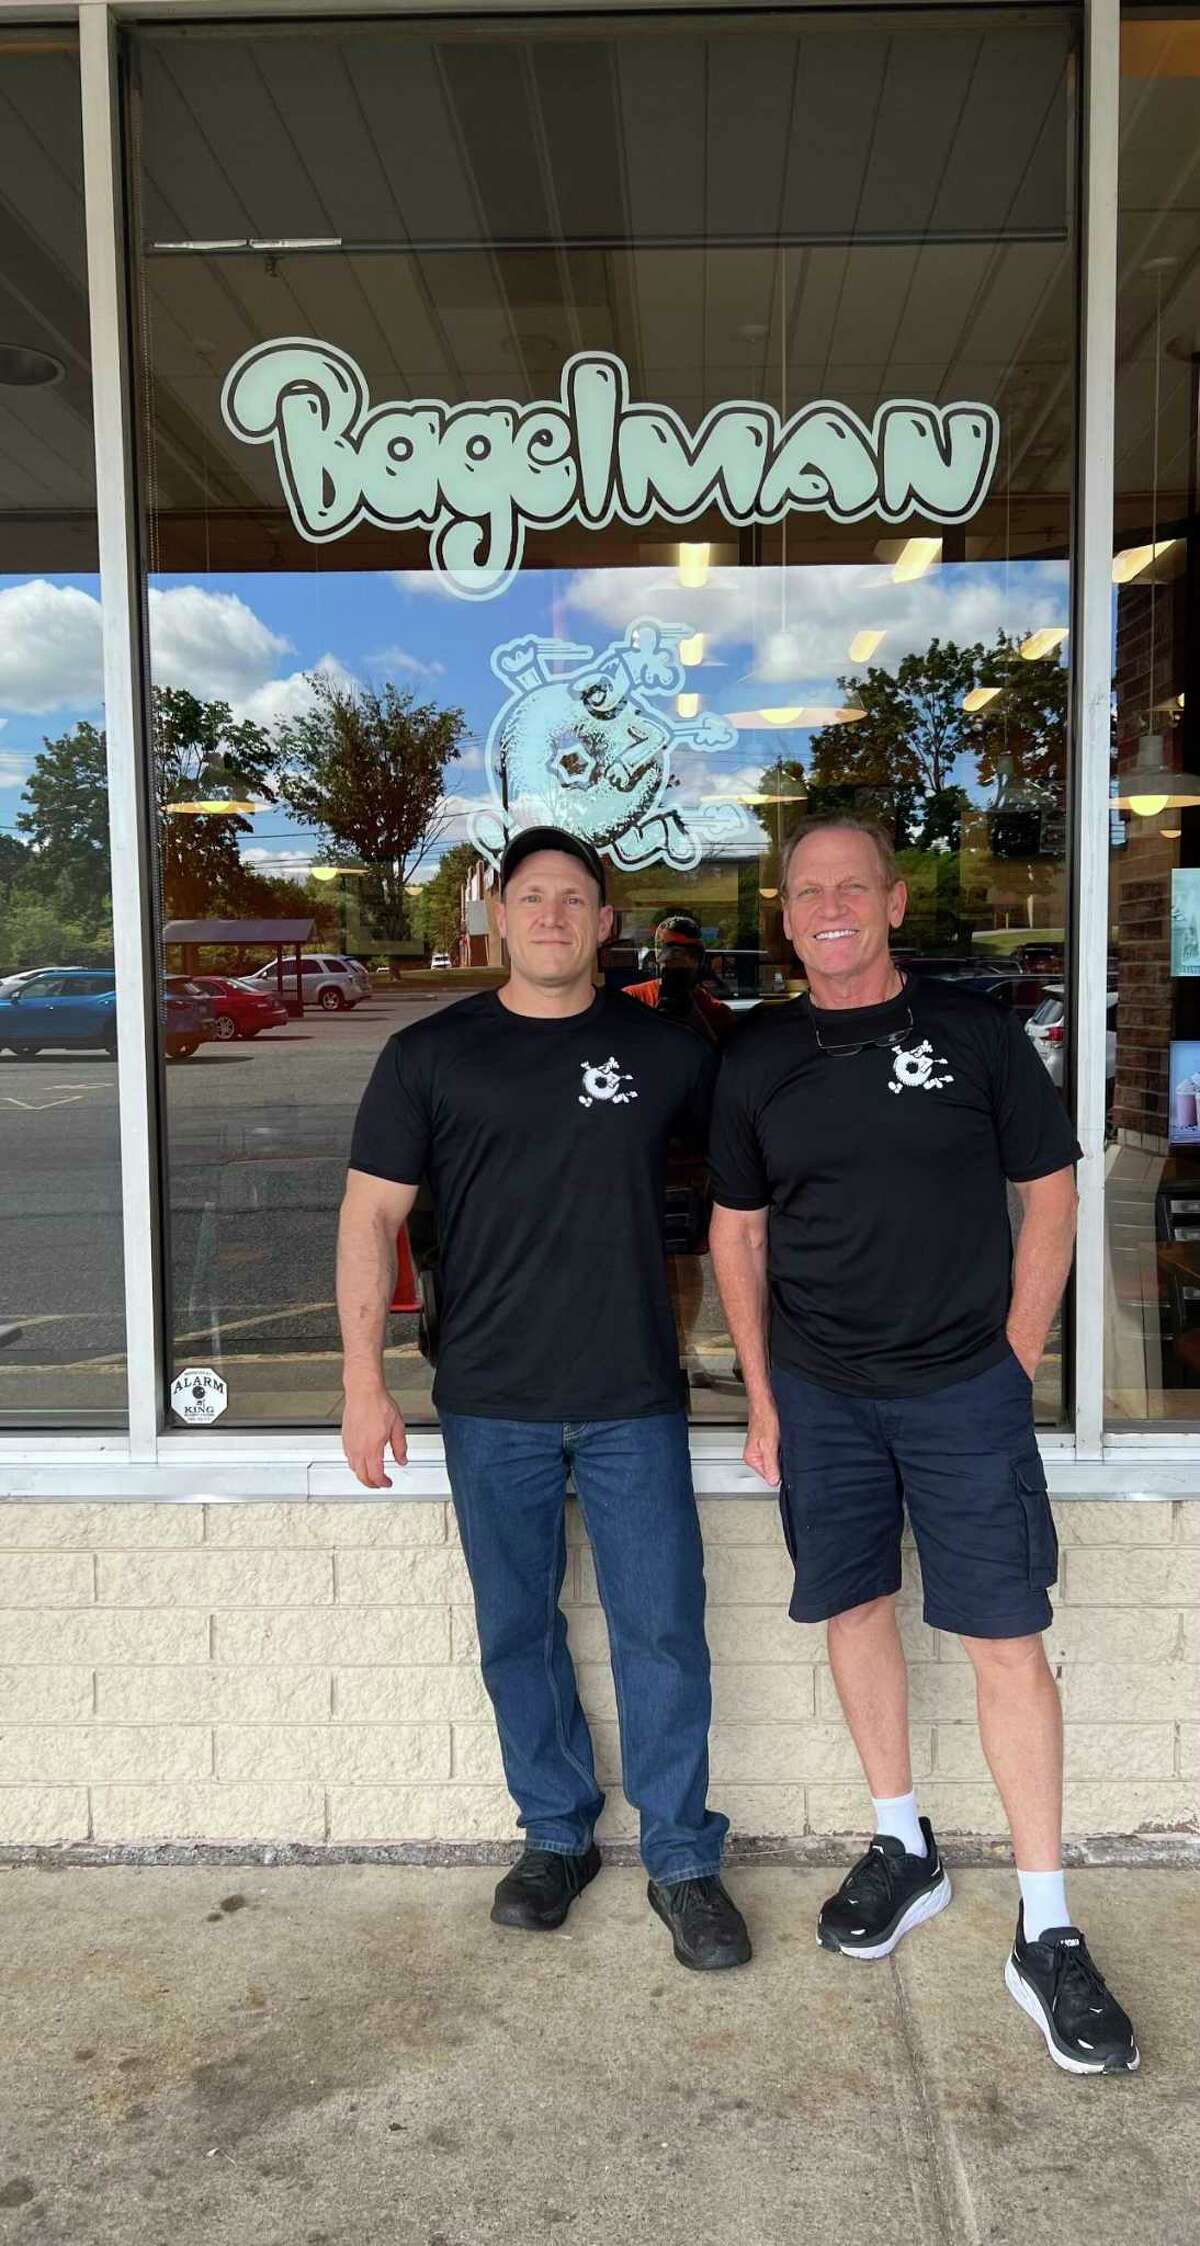 From left, Marc Froehlich with his father, who shares his name, standing outside of Bagelman in Brookfield. They will soon be opening a new location of the business in New Milford.